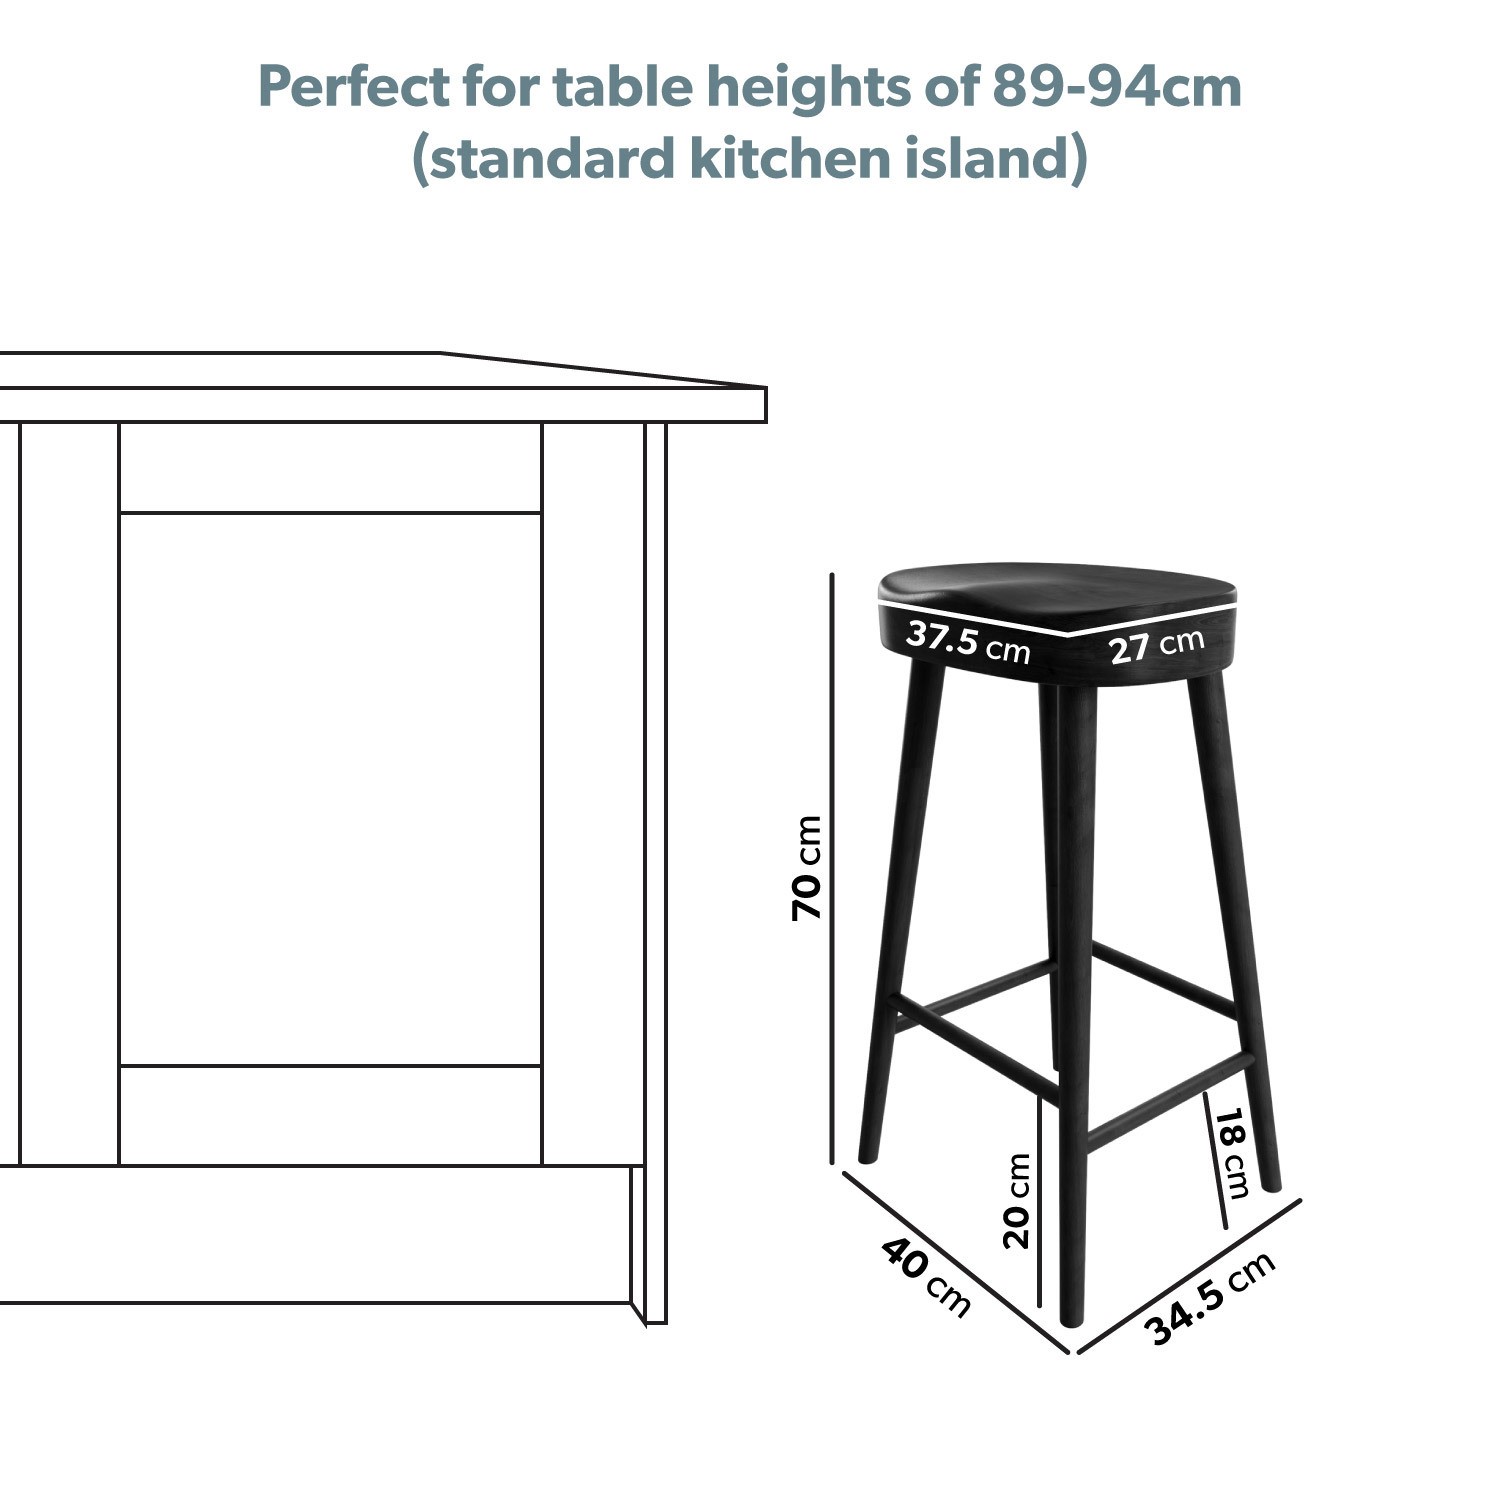 Read more about Set of 3 black solid oak kitchen stools 70cm rayne